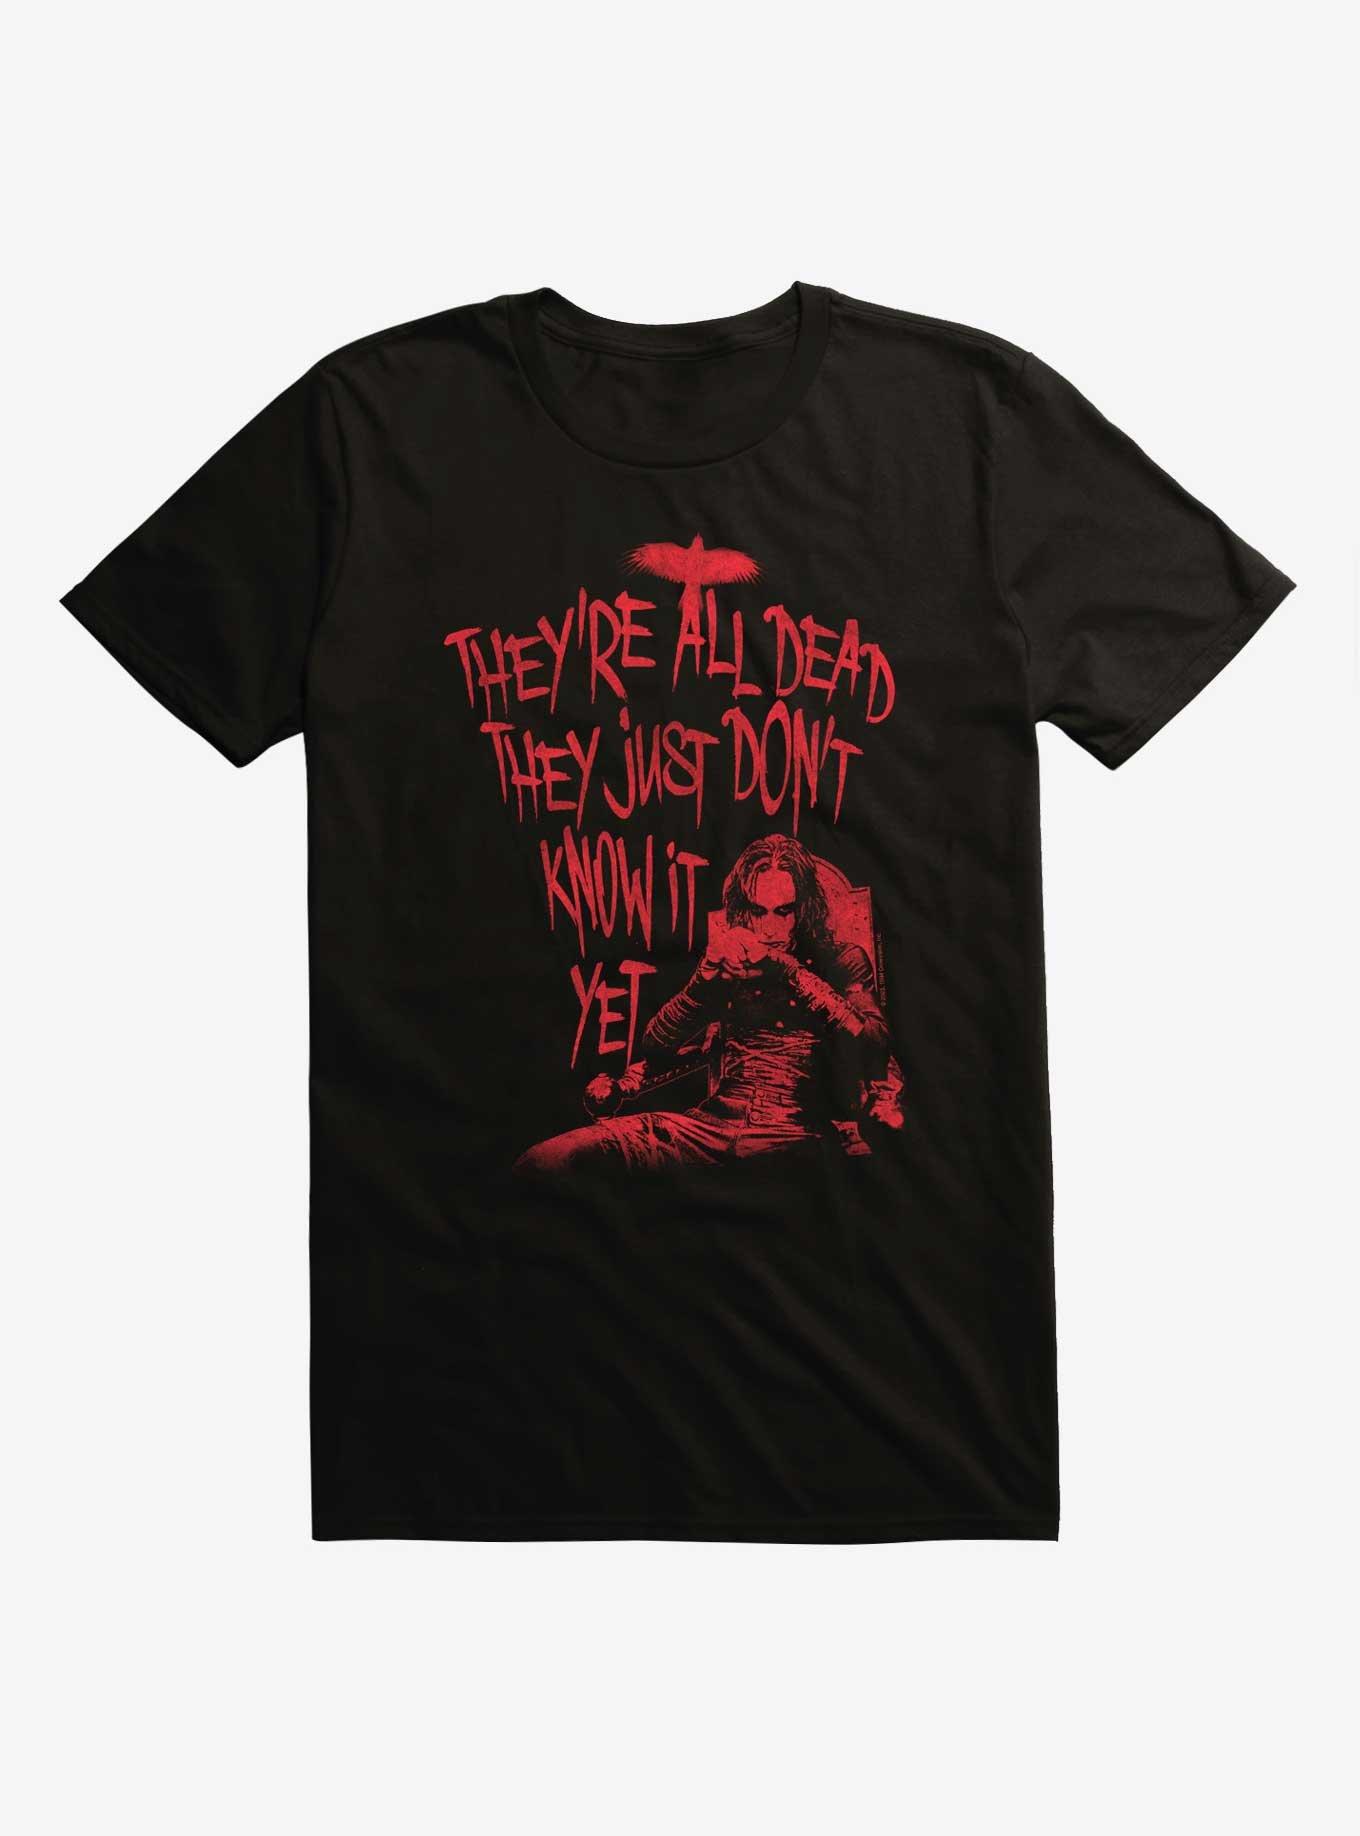 The Crow They Just Don't Know It Yet T-Shirt - BLACK | Hot Topic